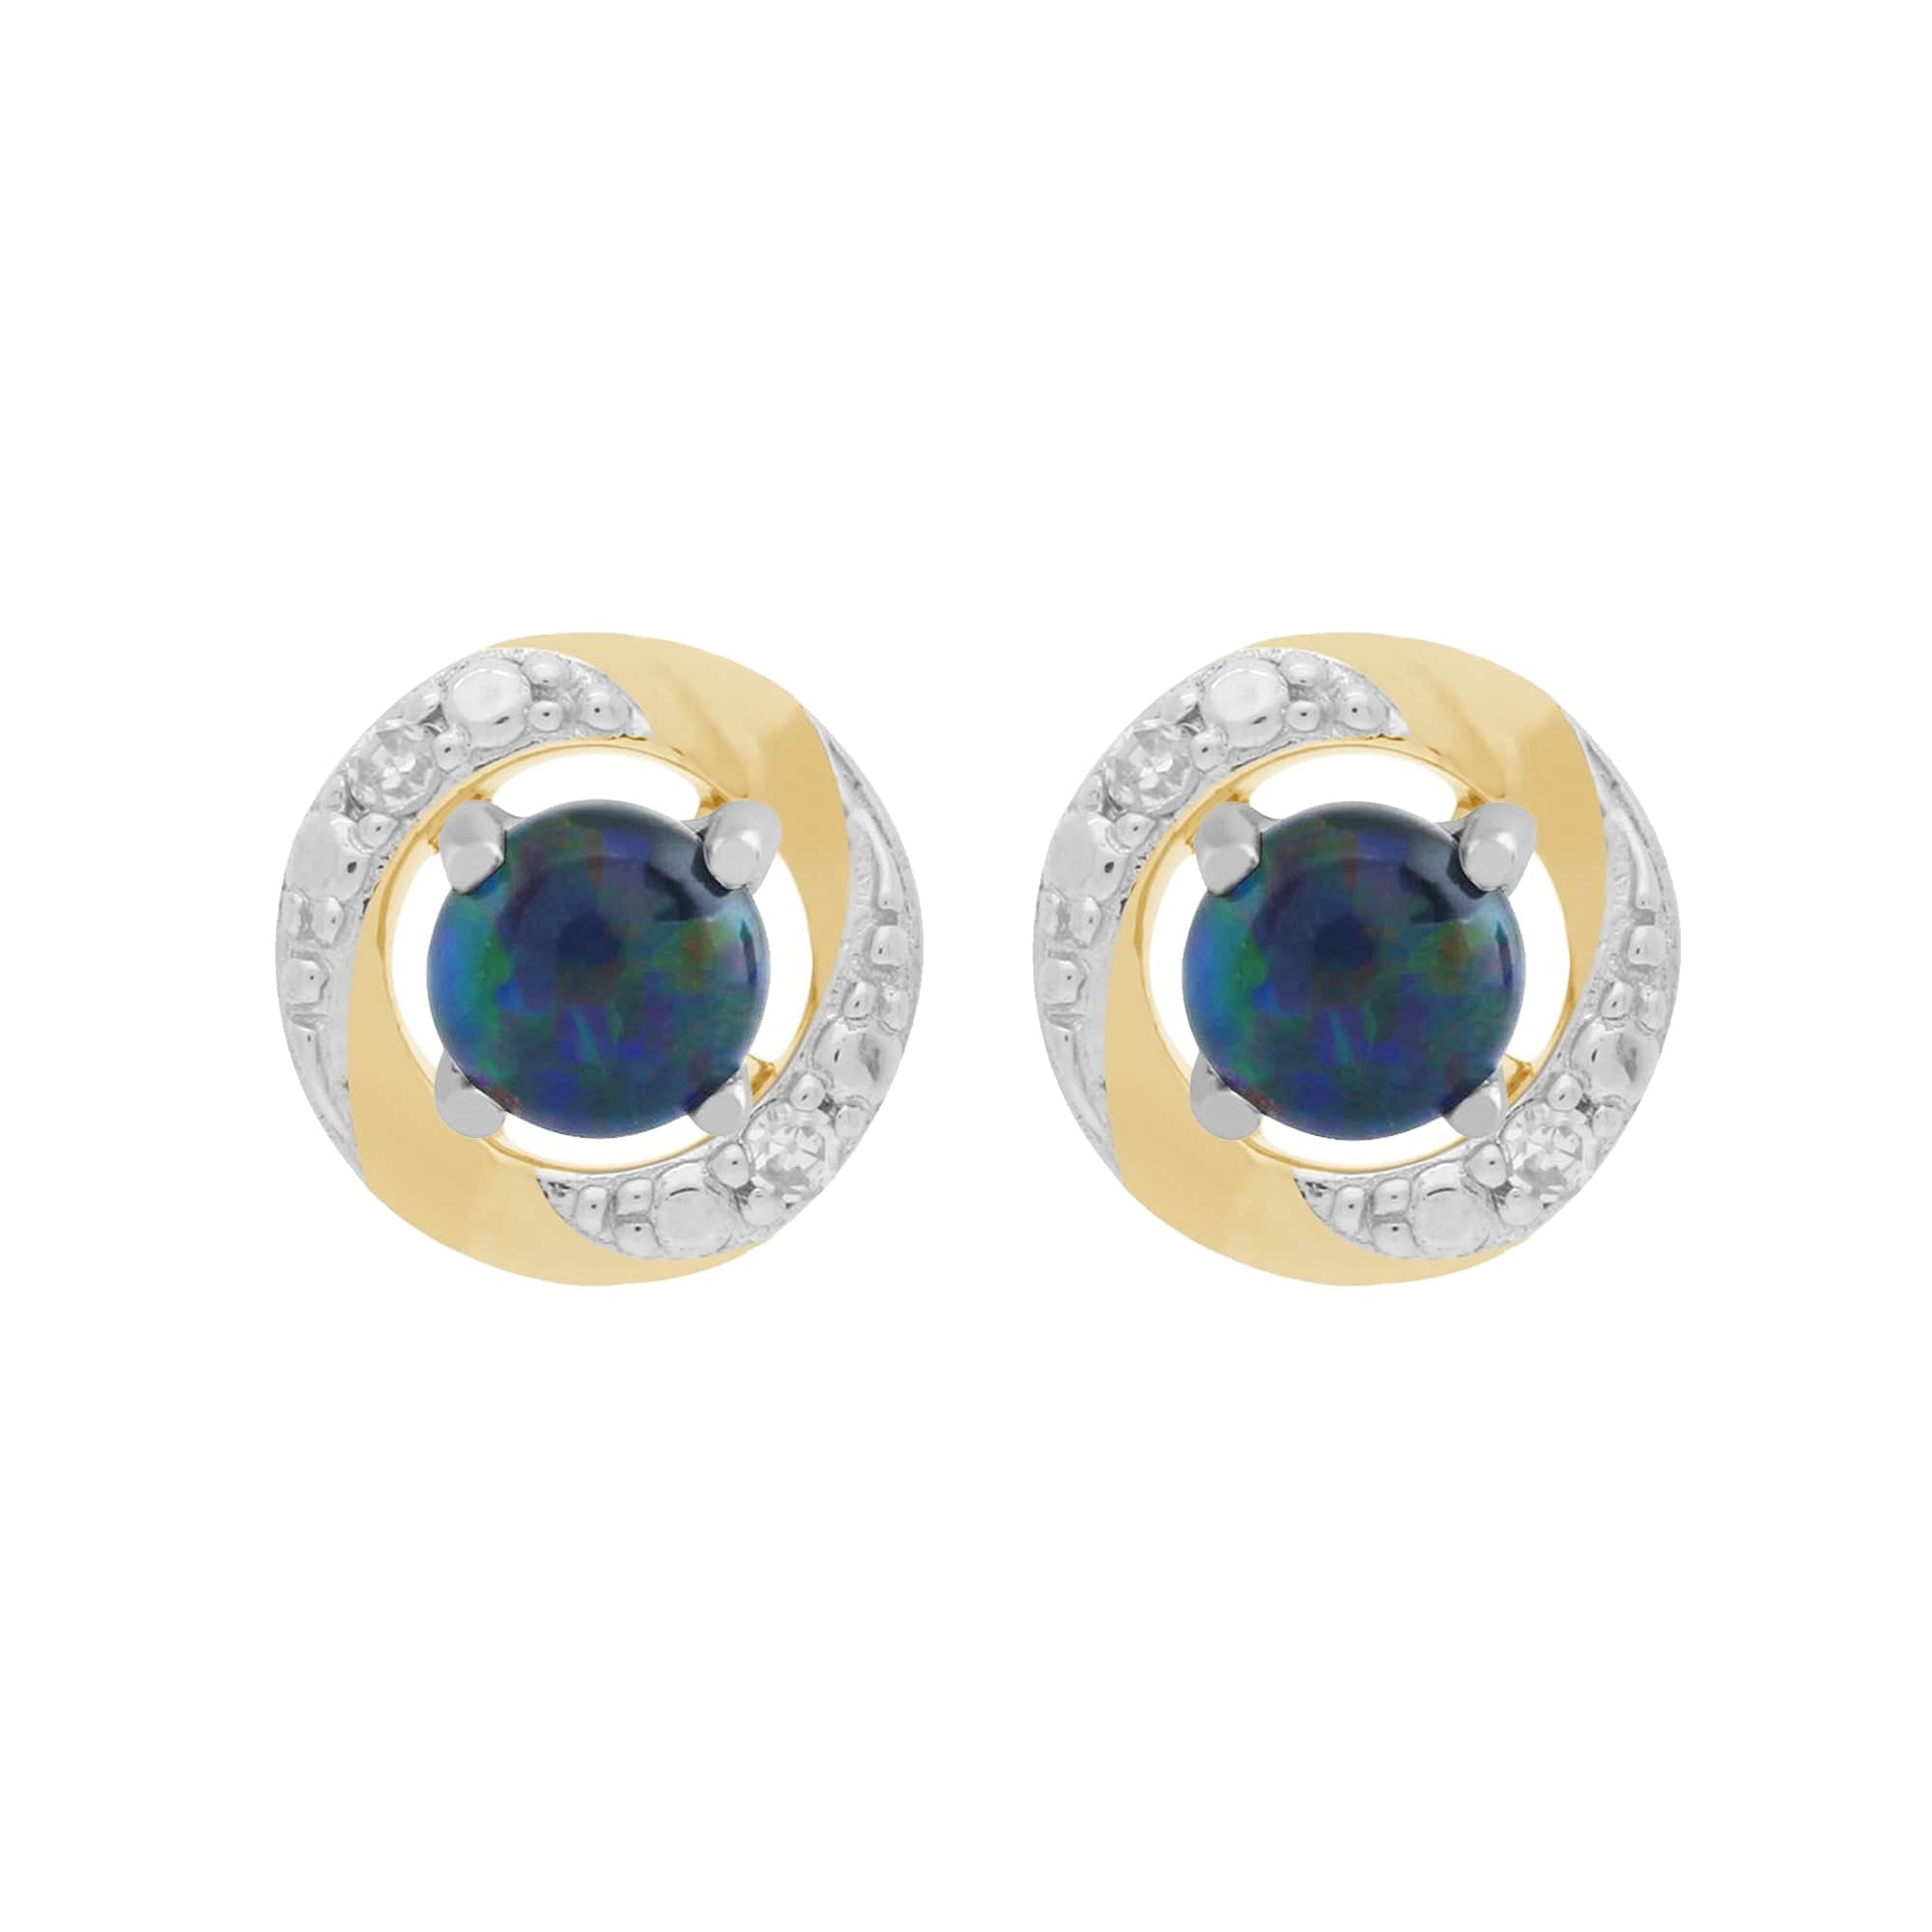 162E0071209-191E0374019 9ct White Gold Triplet Opal Stud Earrings with Detachable Diamond Halo Ear Jacket in 9ct Yellow Gold 1